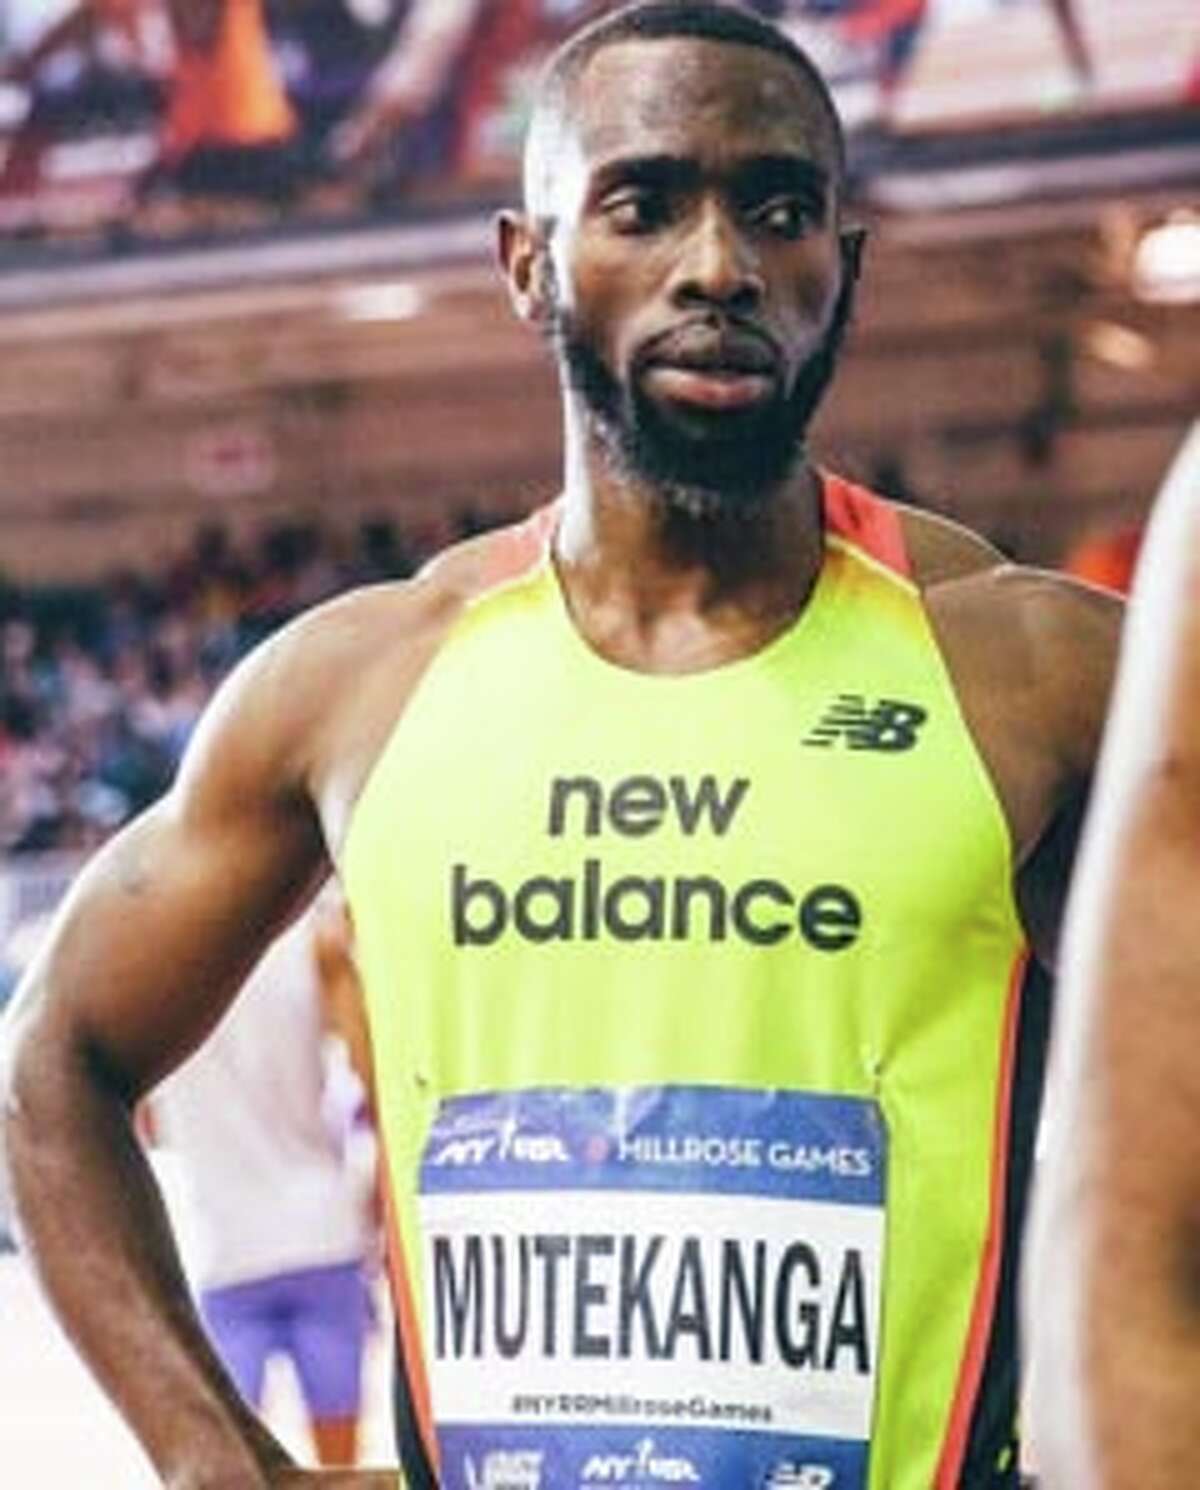 Julius Mutekanga, an Olympic 800-meter runner from Uganda, will give the keynote speech at Convent of the Sacred Heart’s “Run for Ugandan Girls” Sunday, April 10, 2016 at Sacred Heart. Here, he competes in a recent event in New York City.